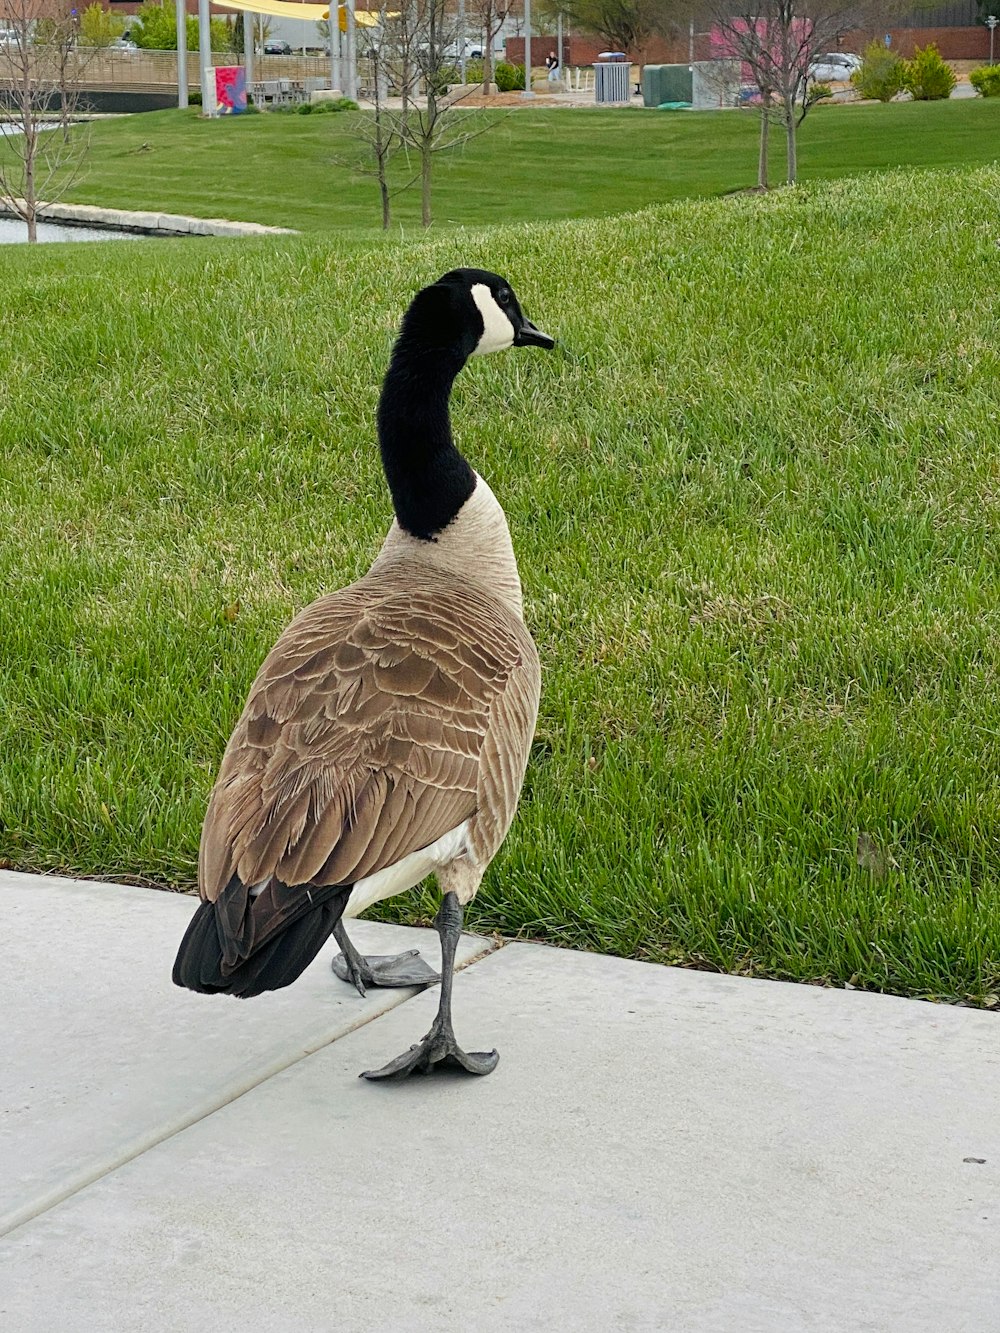 a goose standing on a sidewalk in a park